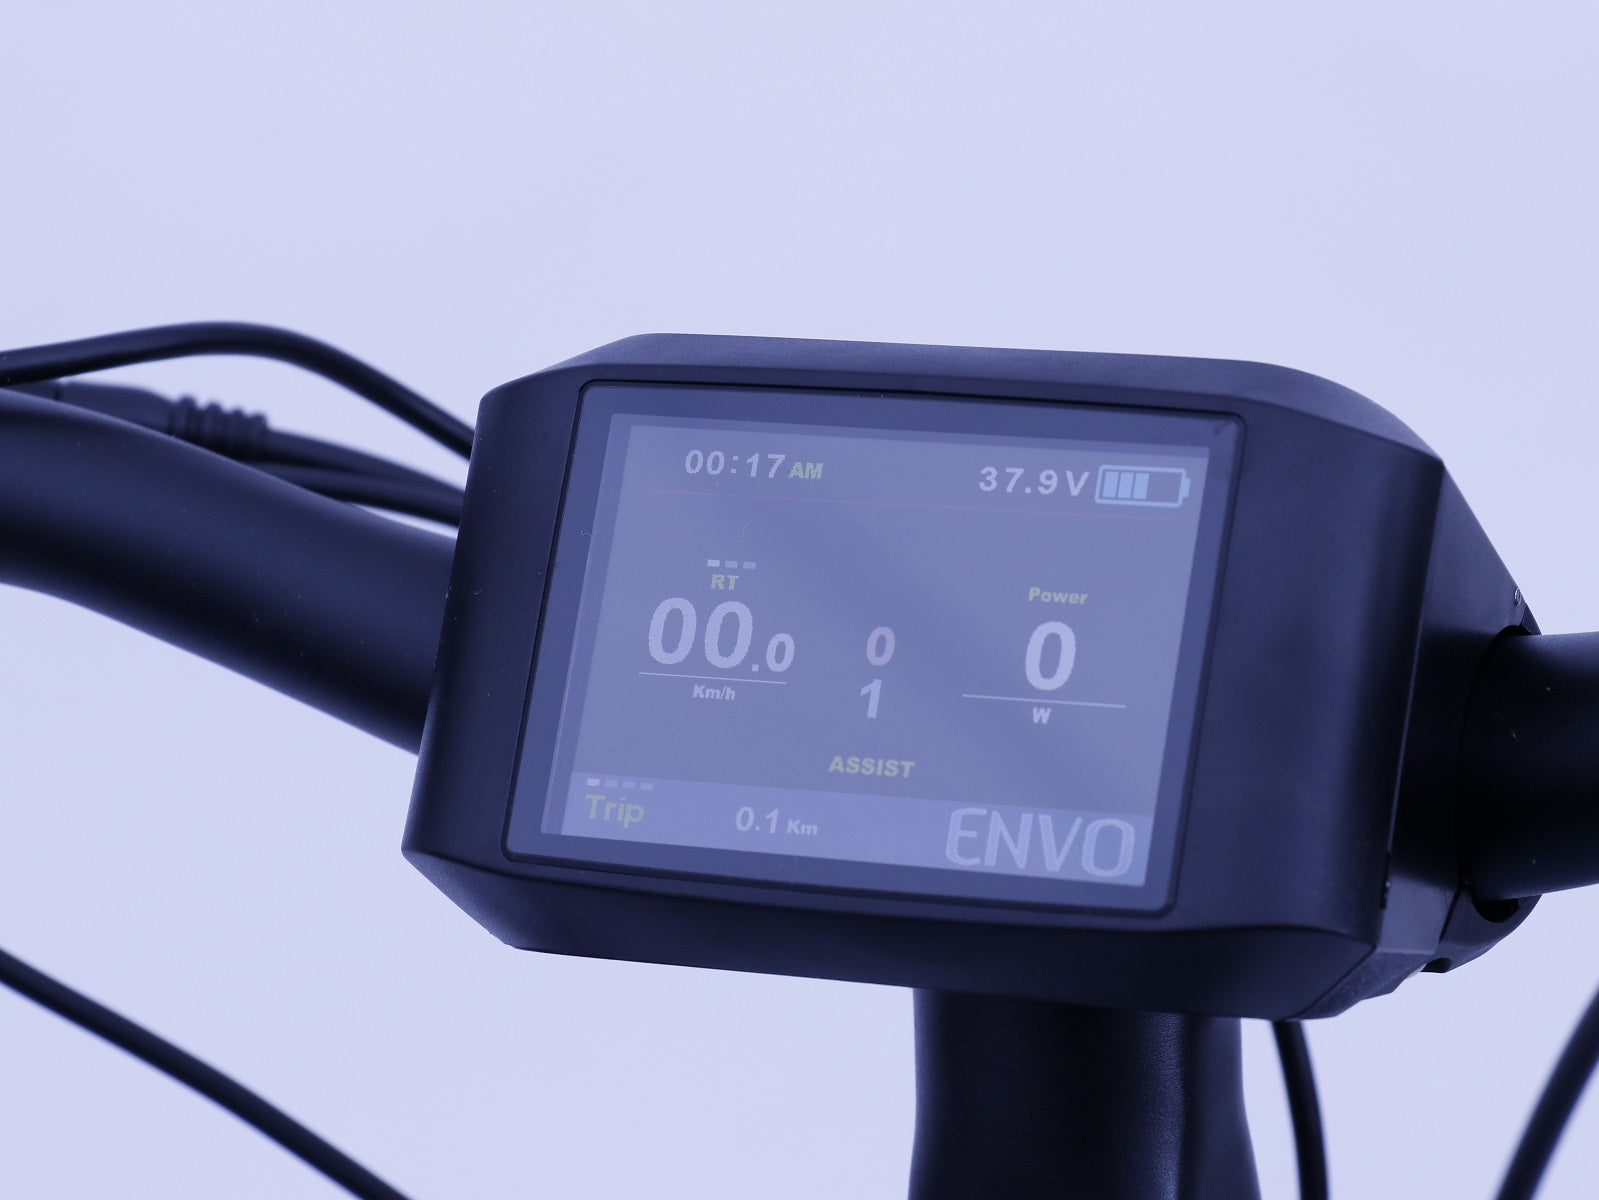 What Do Volts, Amp Hour, And Watts Mean And Why Are They Important In E-Bikes?